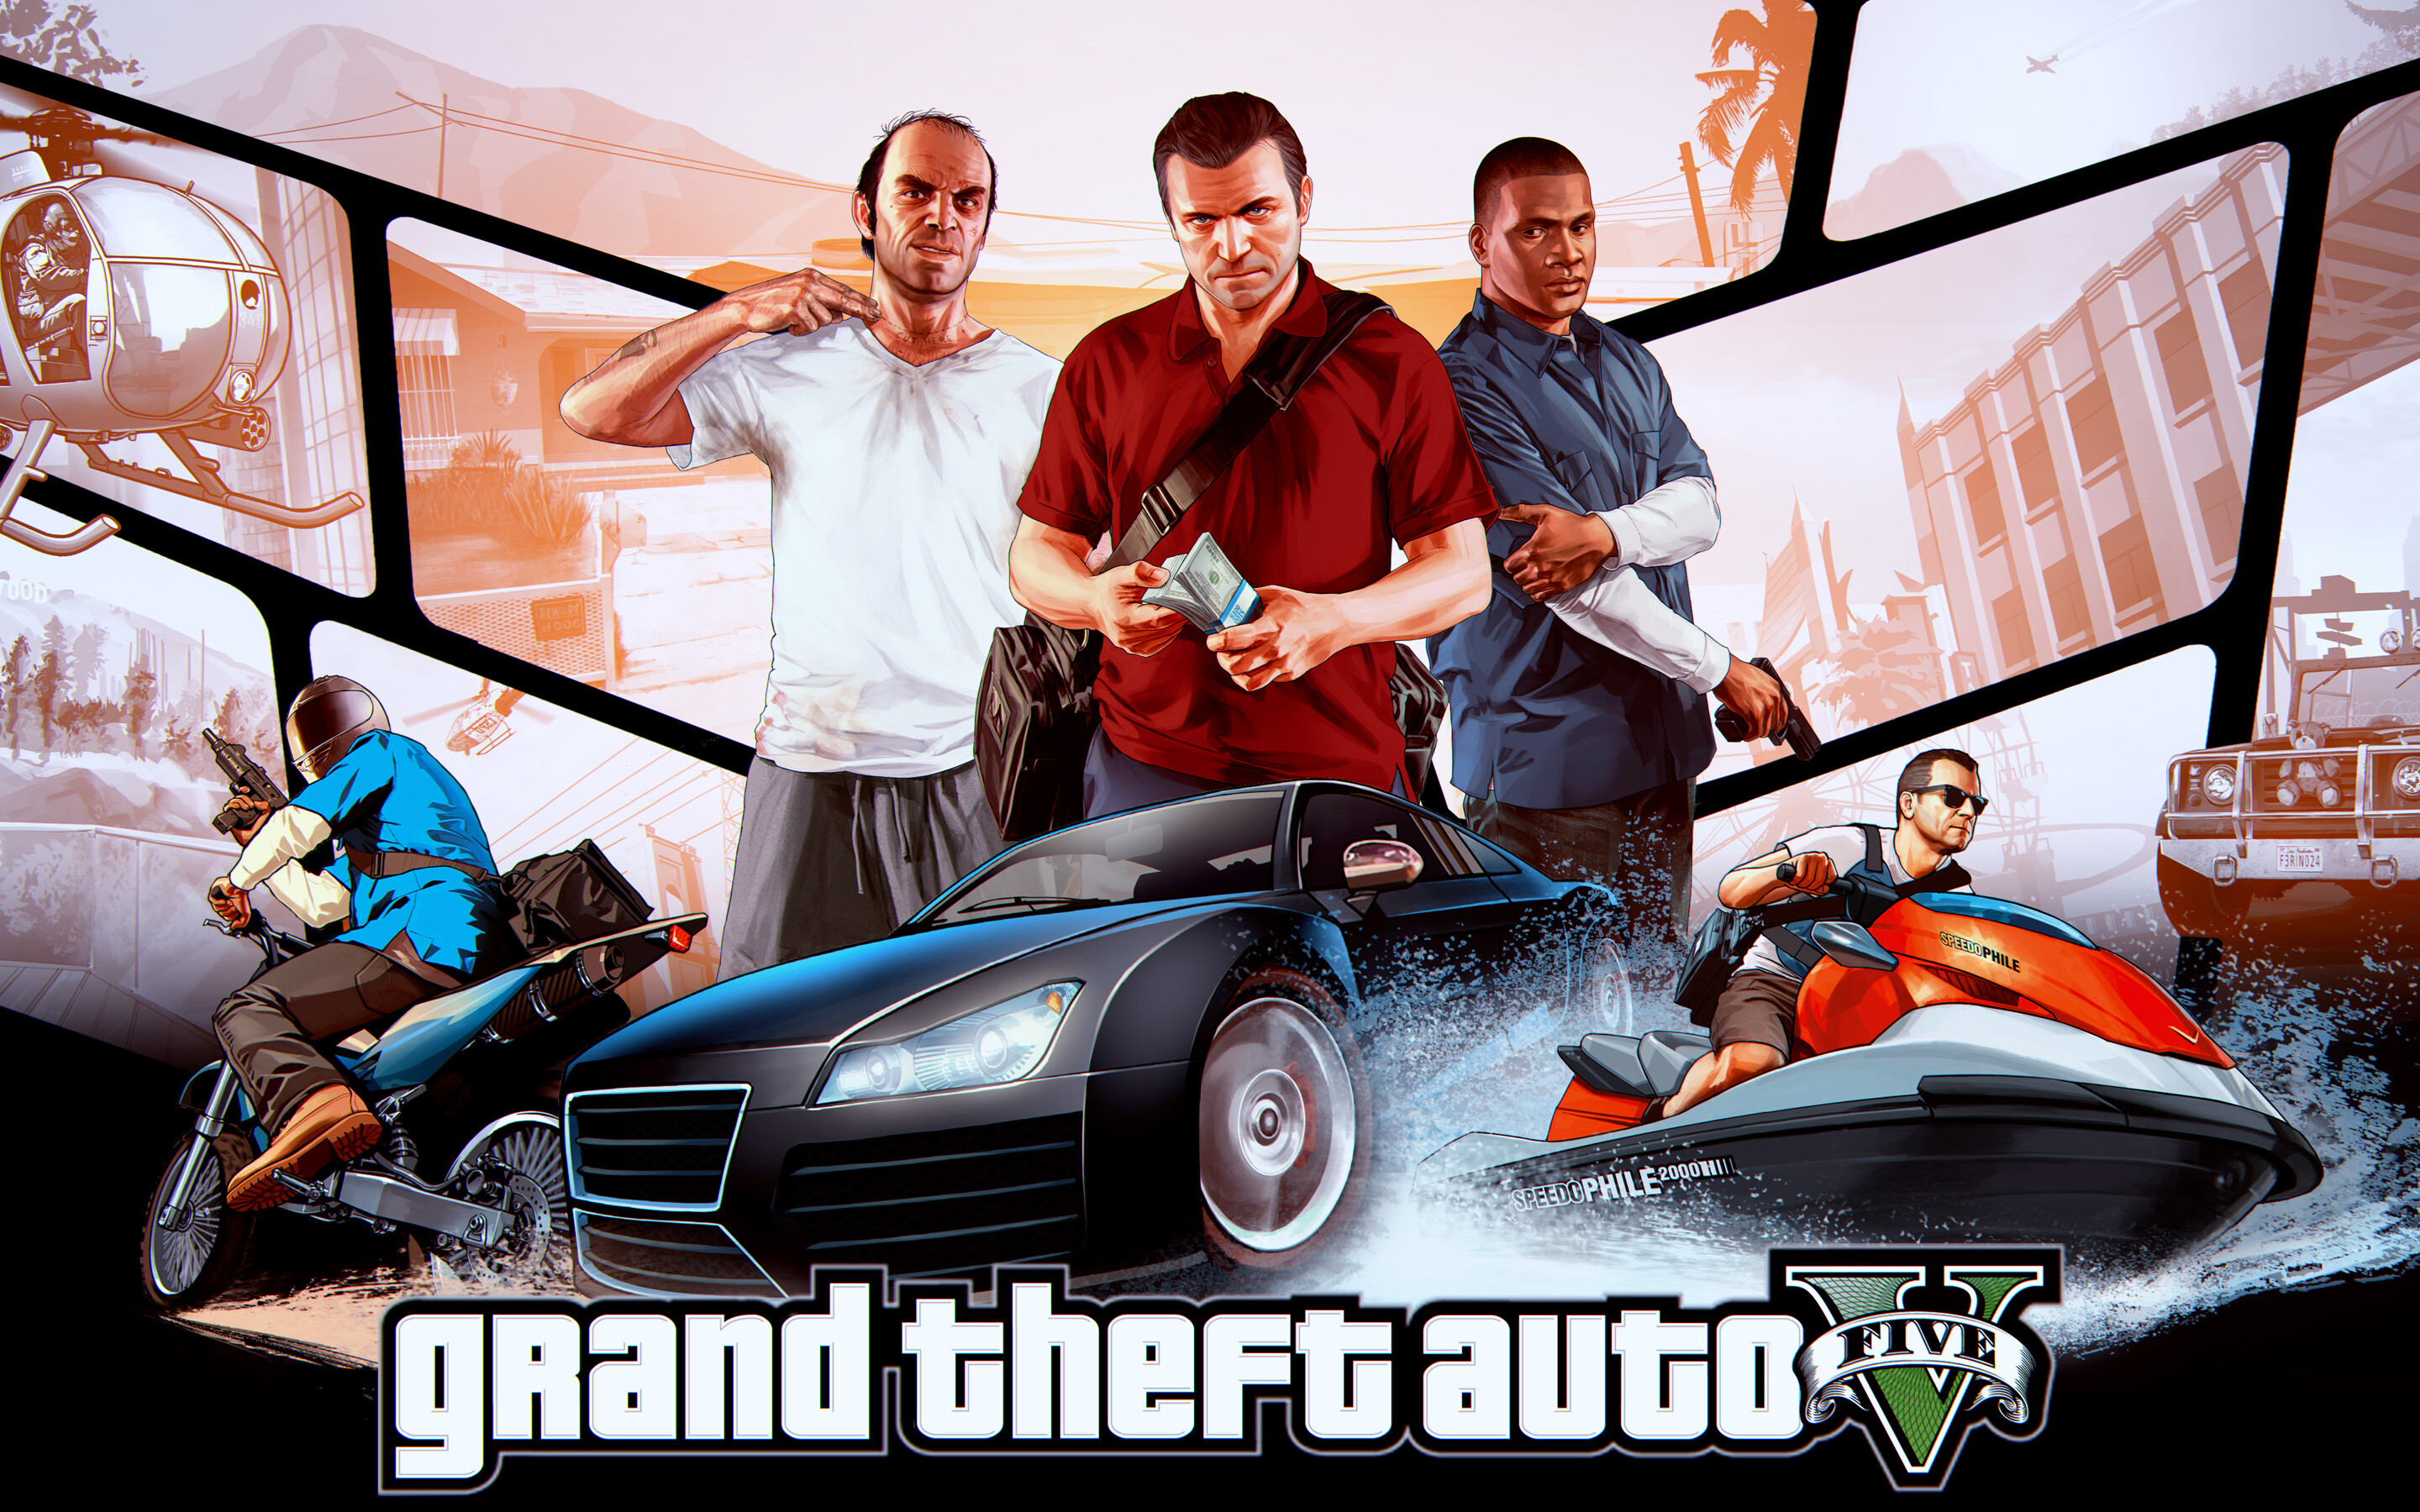 Grand Theft Auto 5: The iconic edition of GTA, Gameplay focuses on an open world. 2880x1800 HD Background.